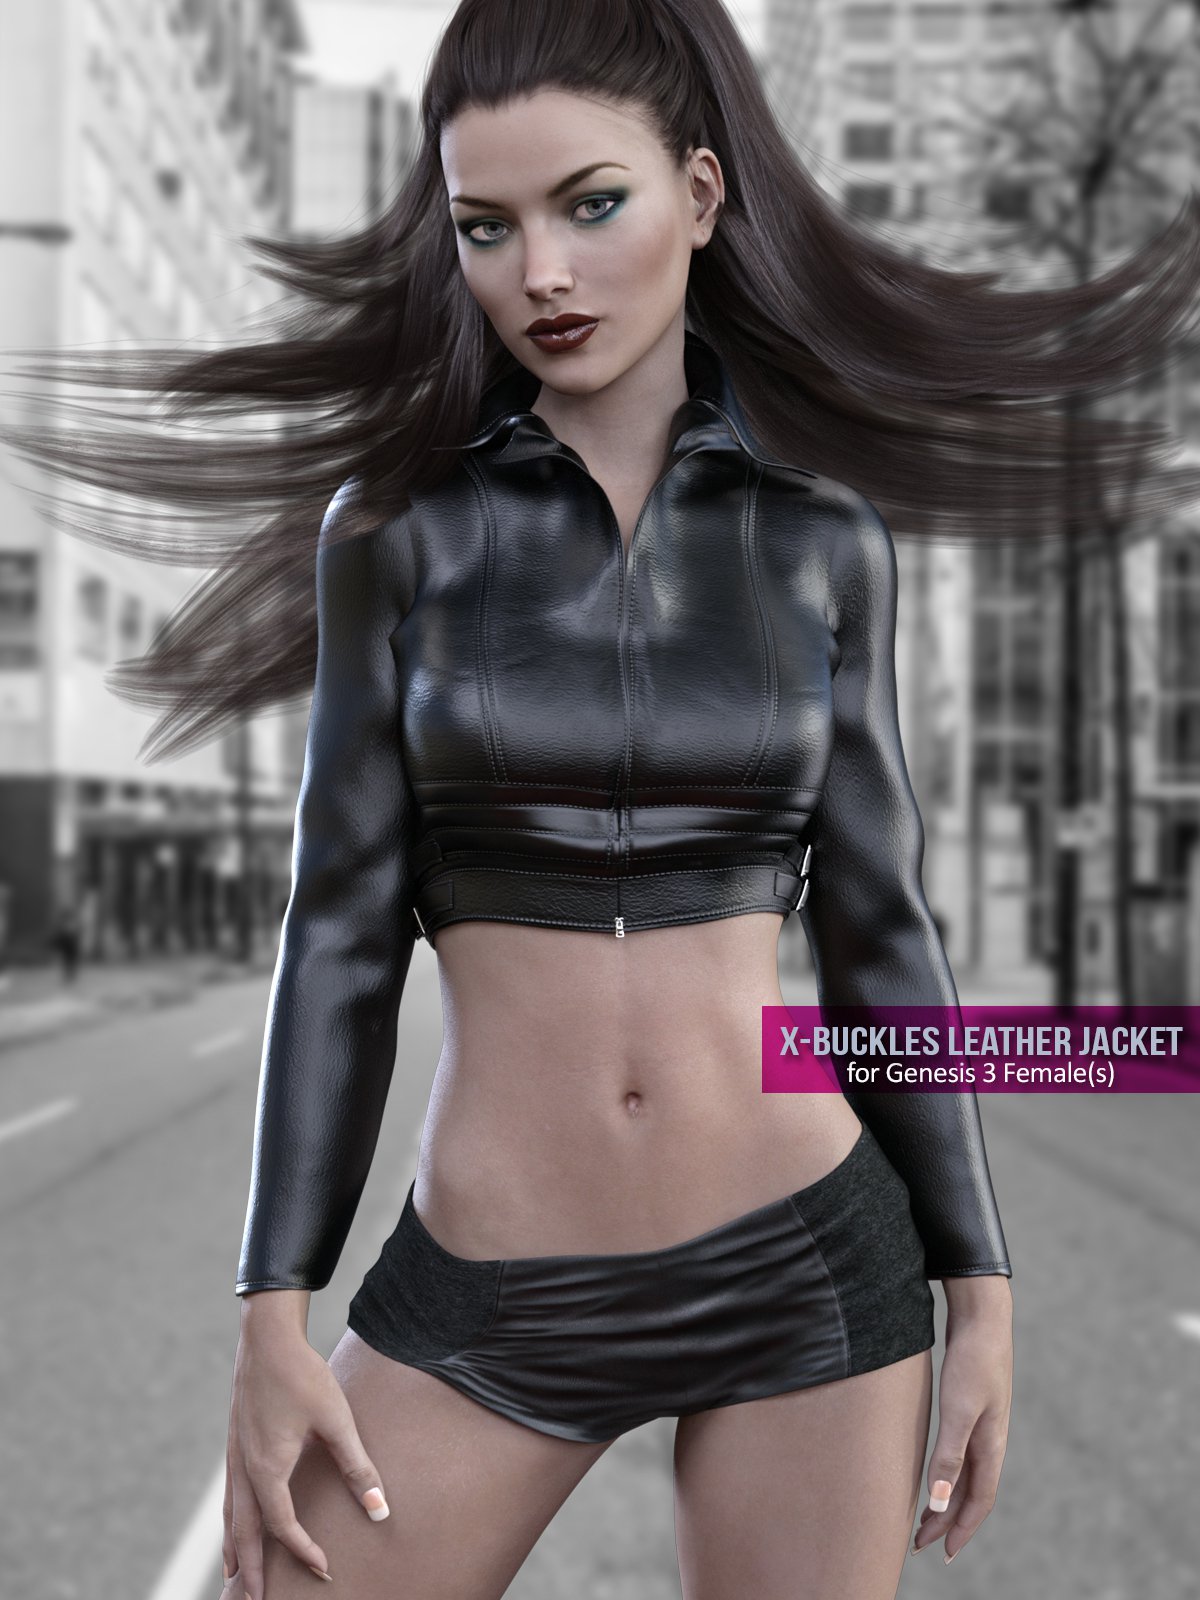 X-Fashion Buckles Jacket Outfit for Genesis 3 Females_DAZ3D下载站